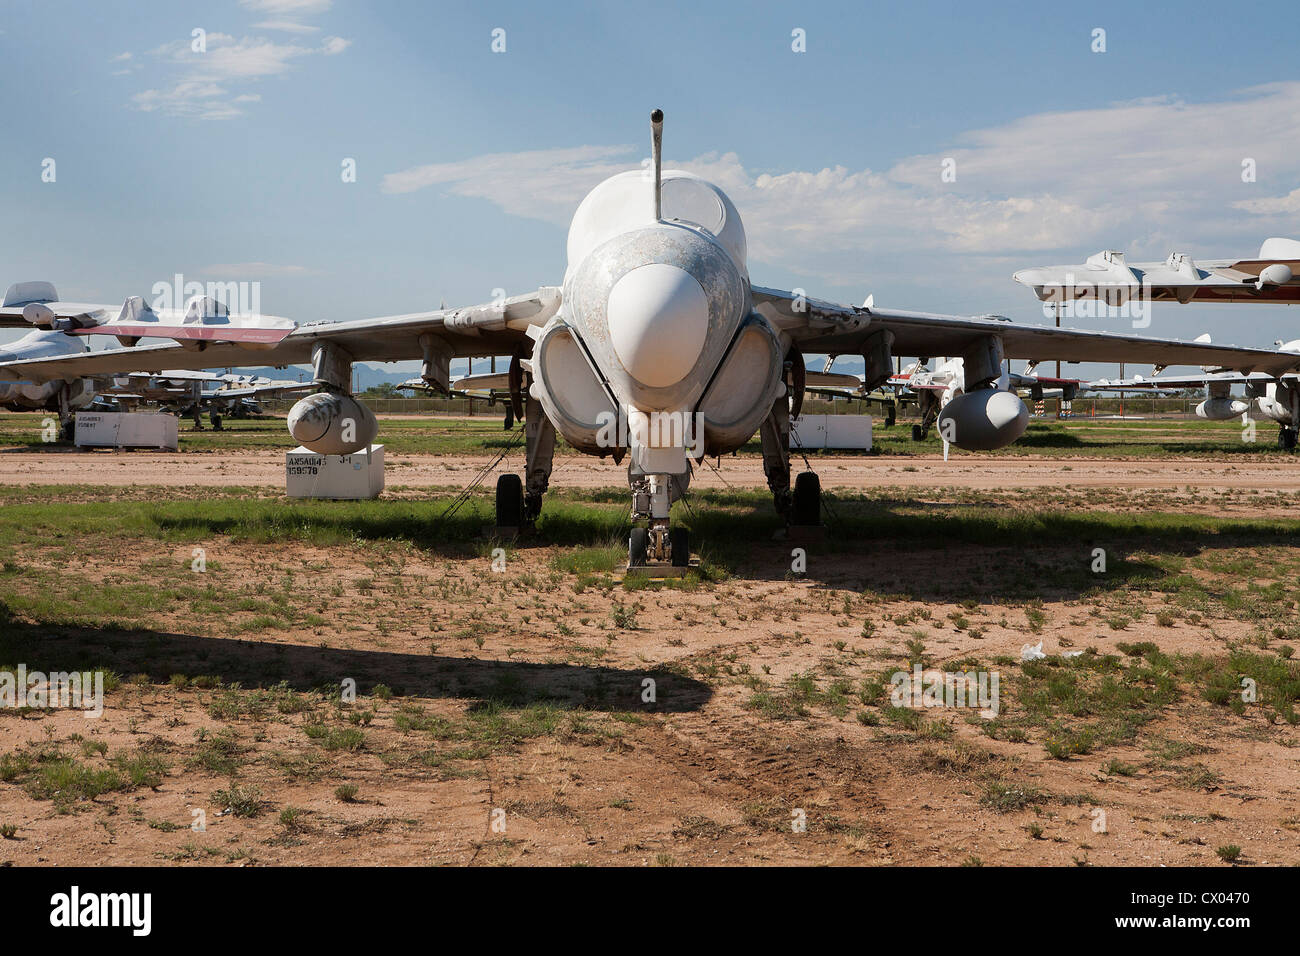 A-6 Eindringling Flugzeuge in der Lagerung bei der 309. Aerospace Maintenance and Regeneration Group in Davis-Monthan Air Force Base. Stockfoto